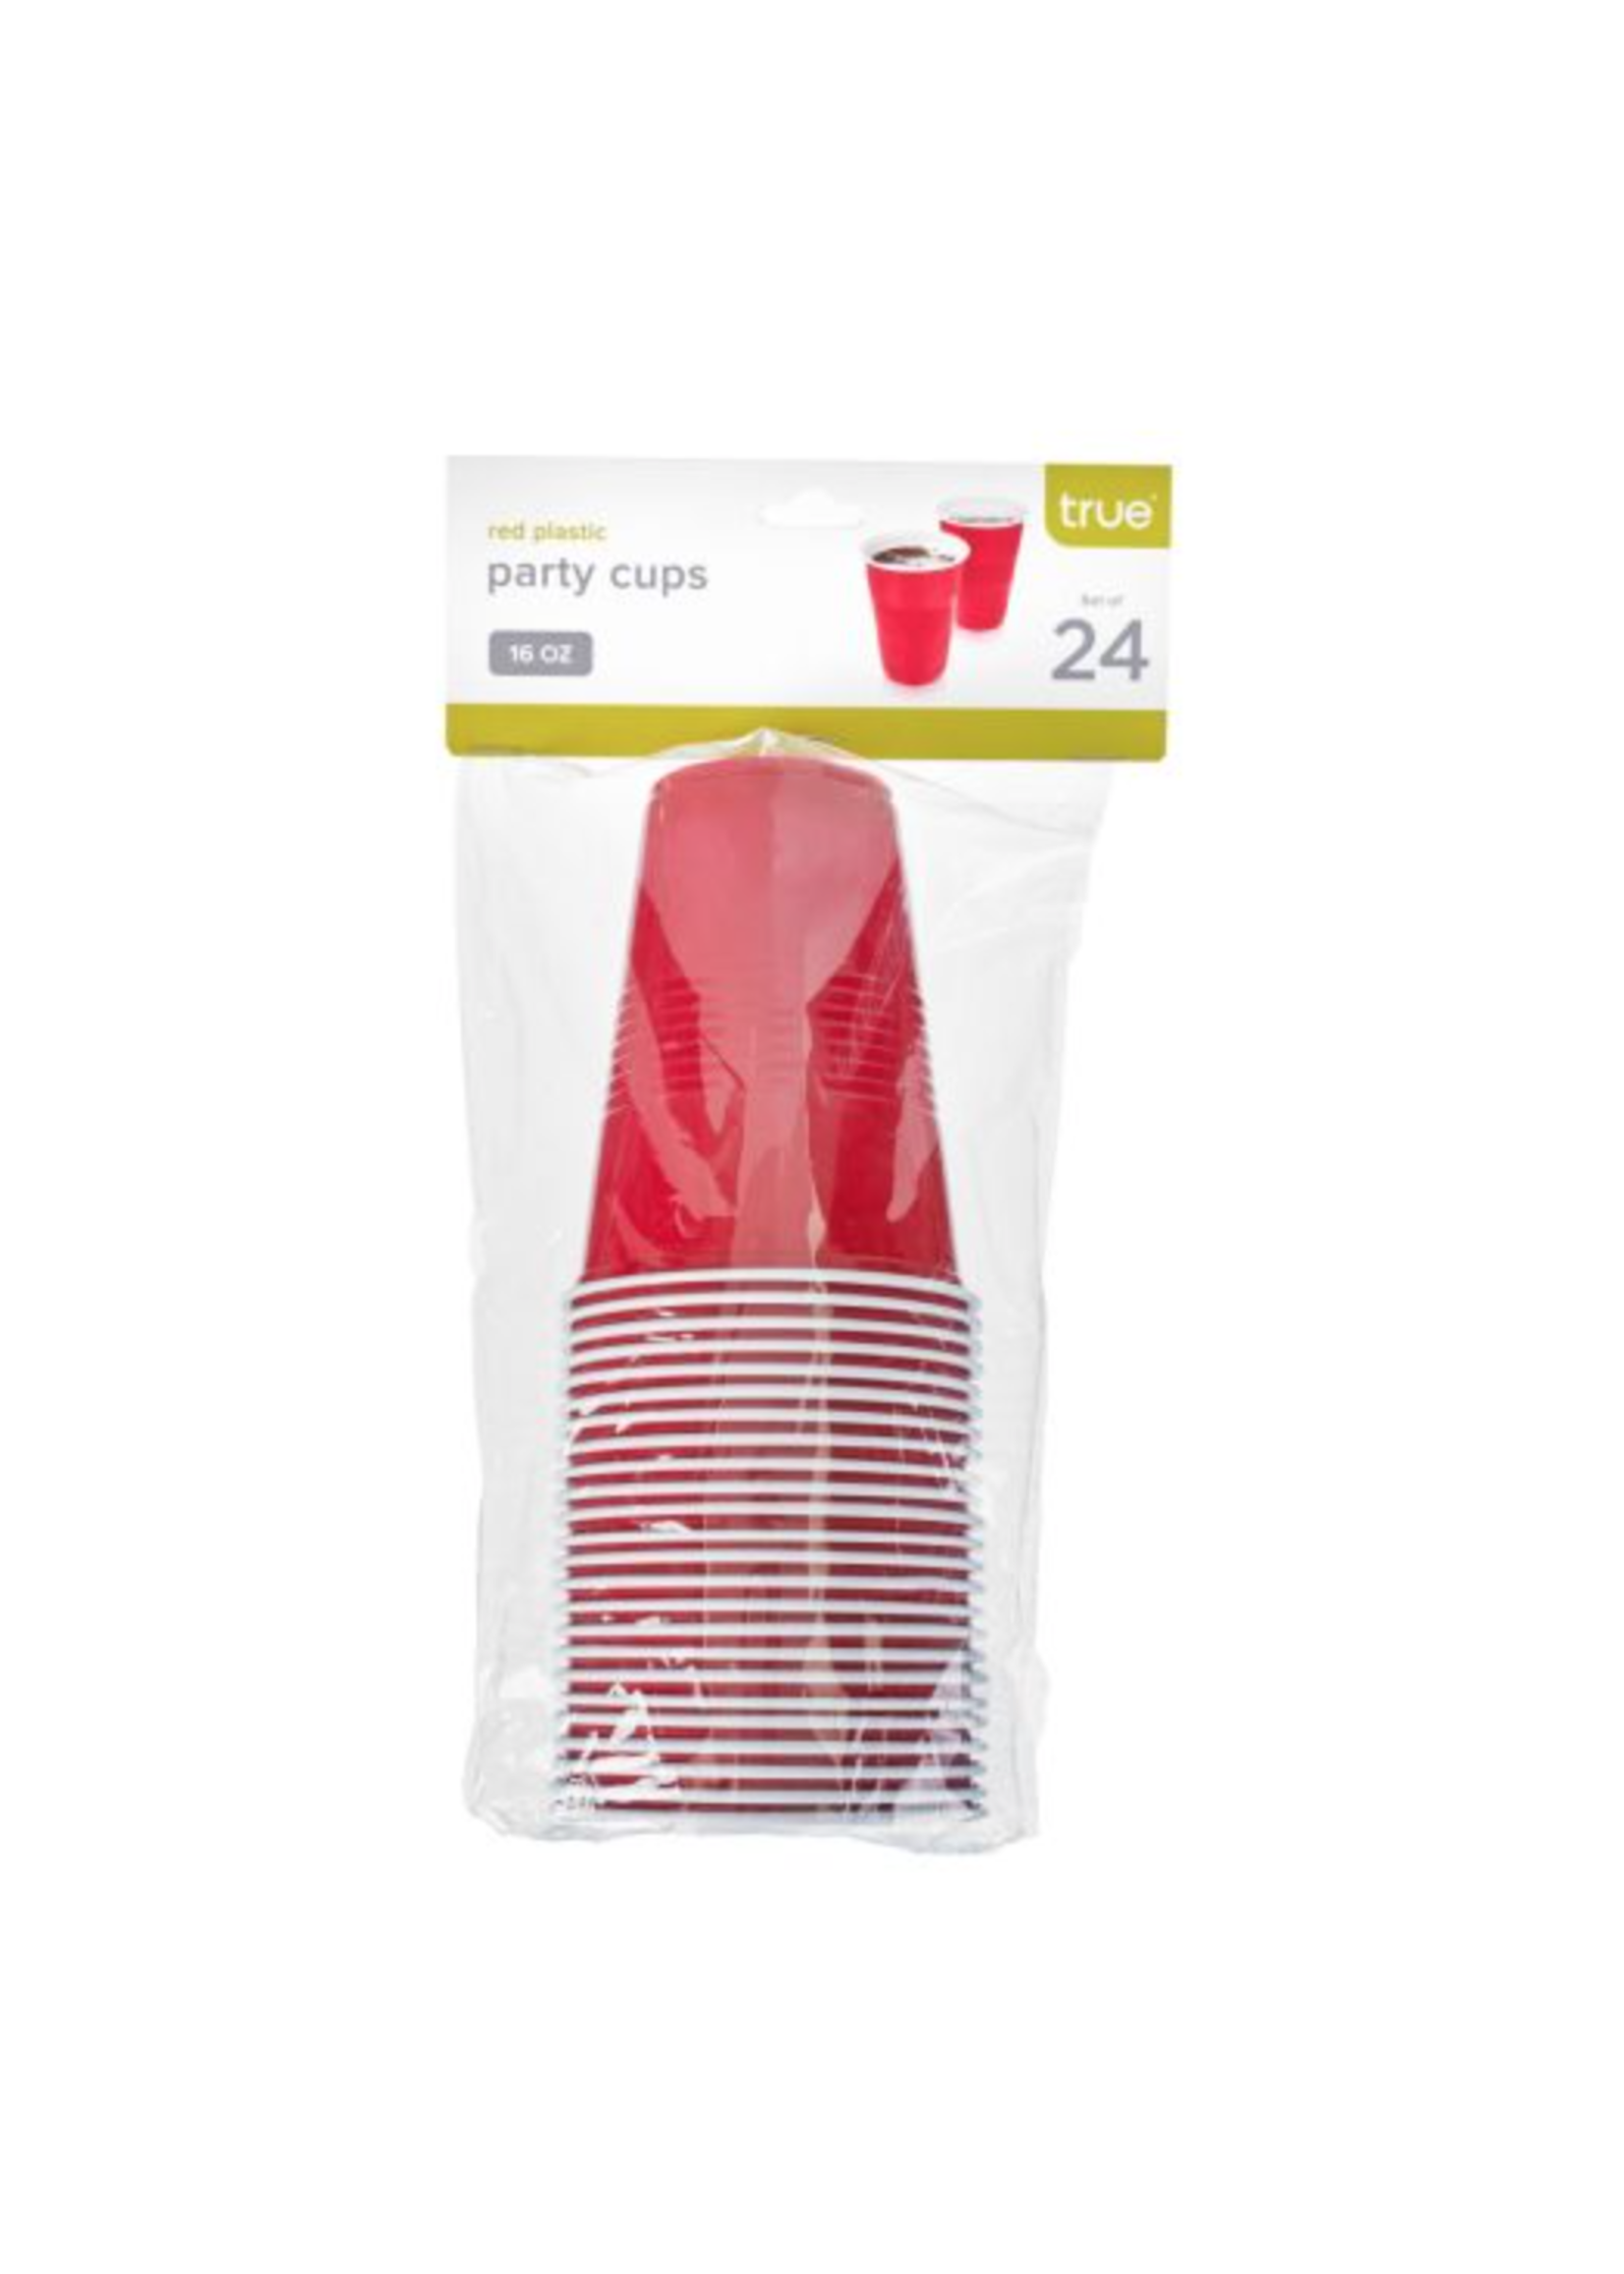 16 OZ RED PARTY CUPS, 24 PACK